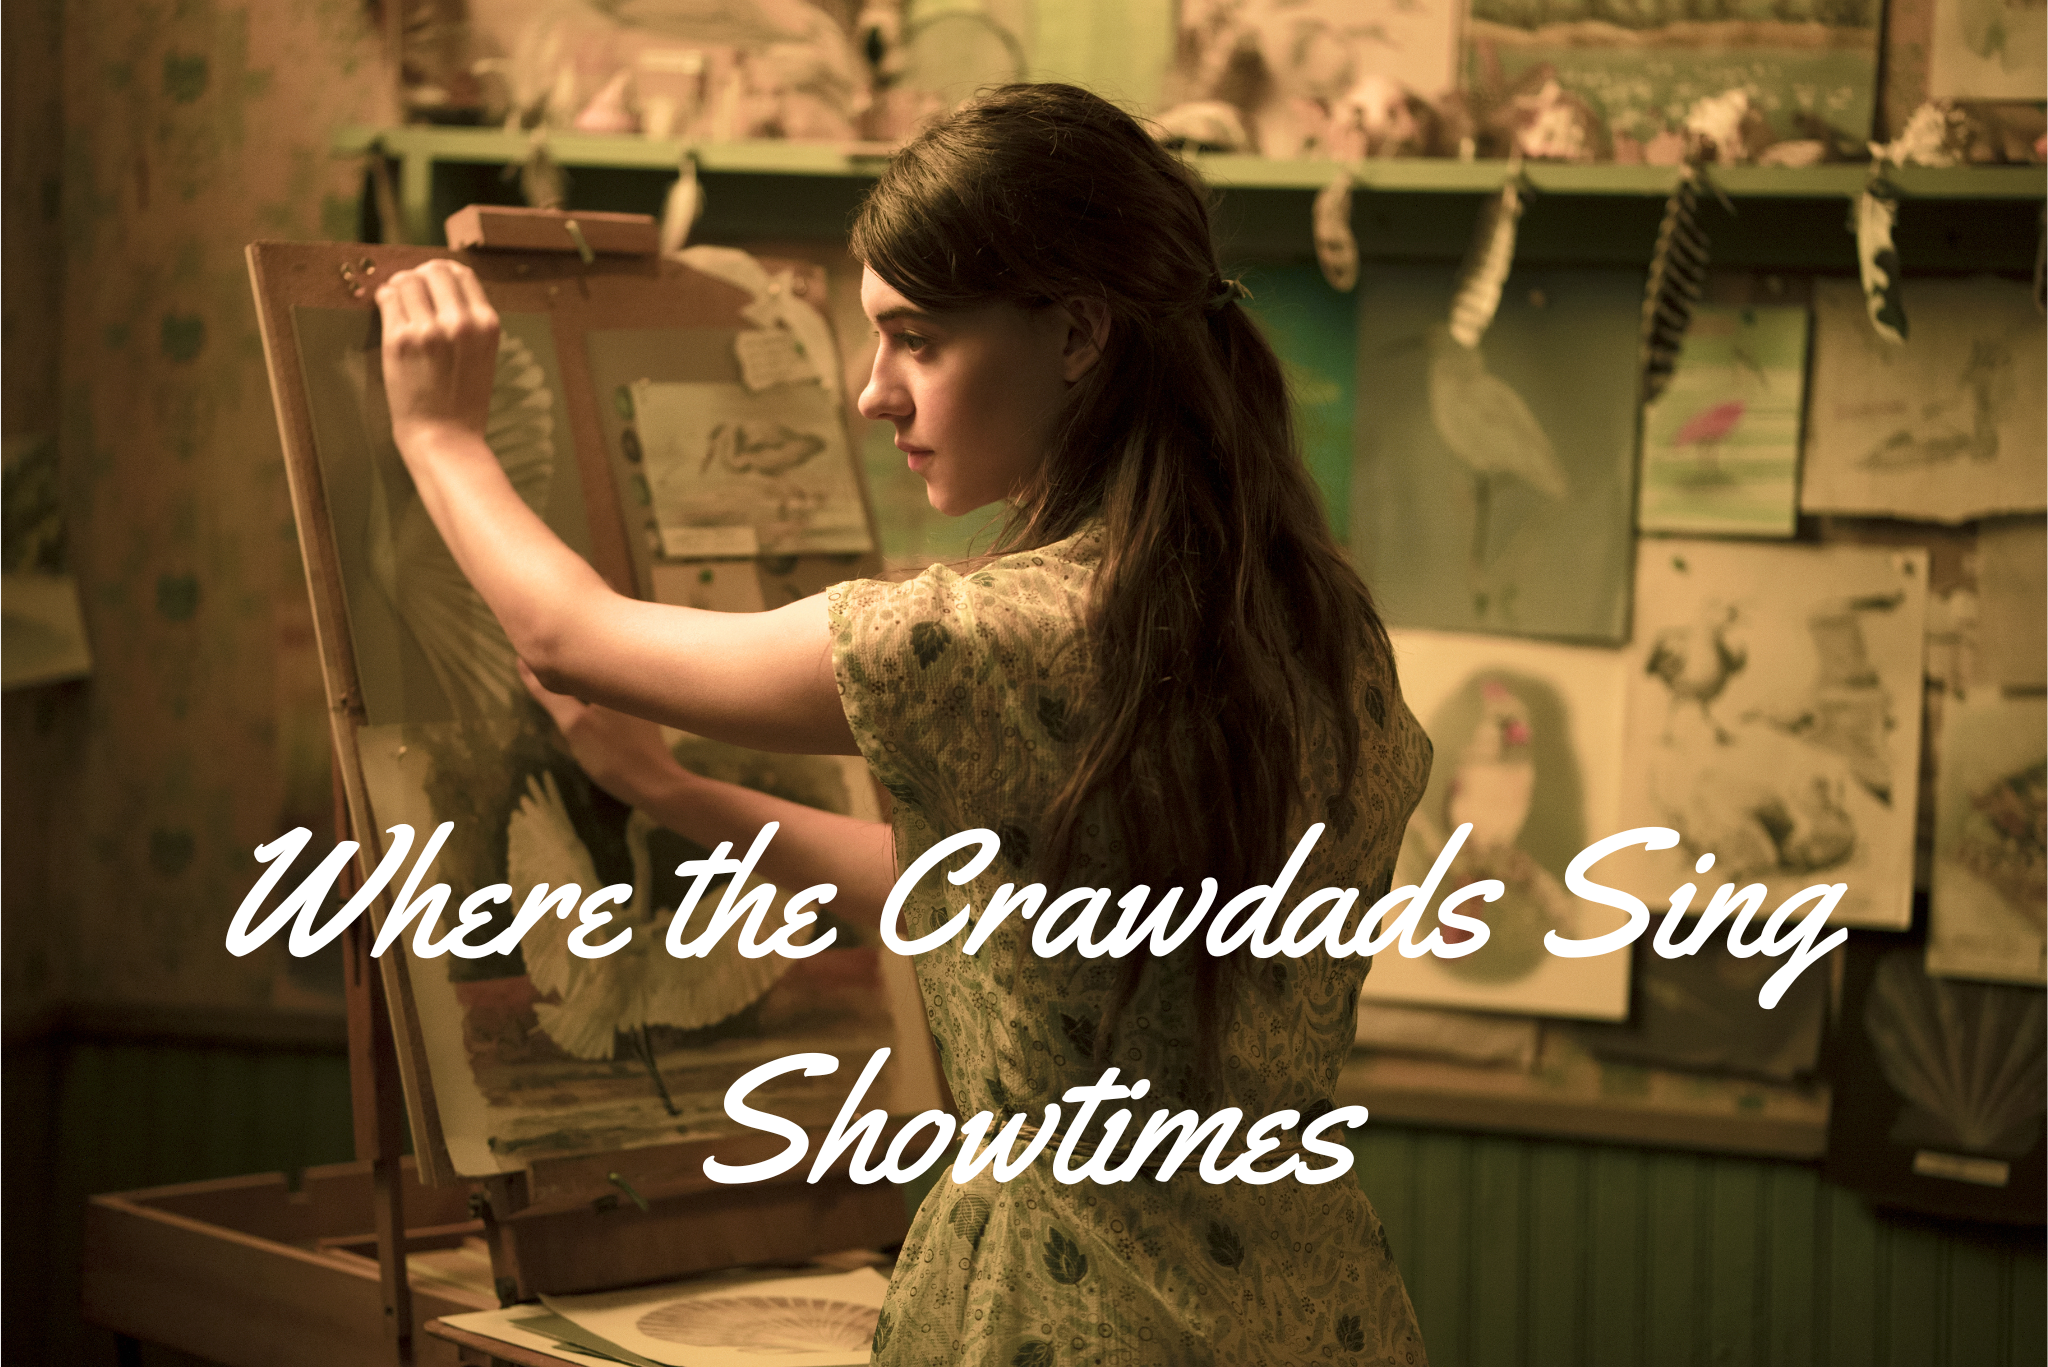 Where the Crawdads Sing Showtimes: Exploring the Film Adaption